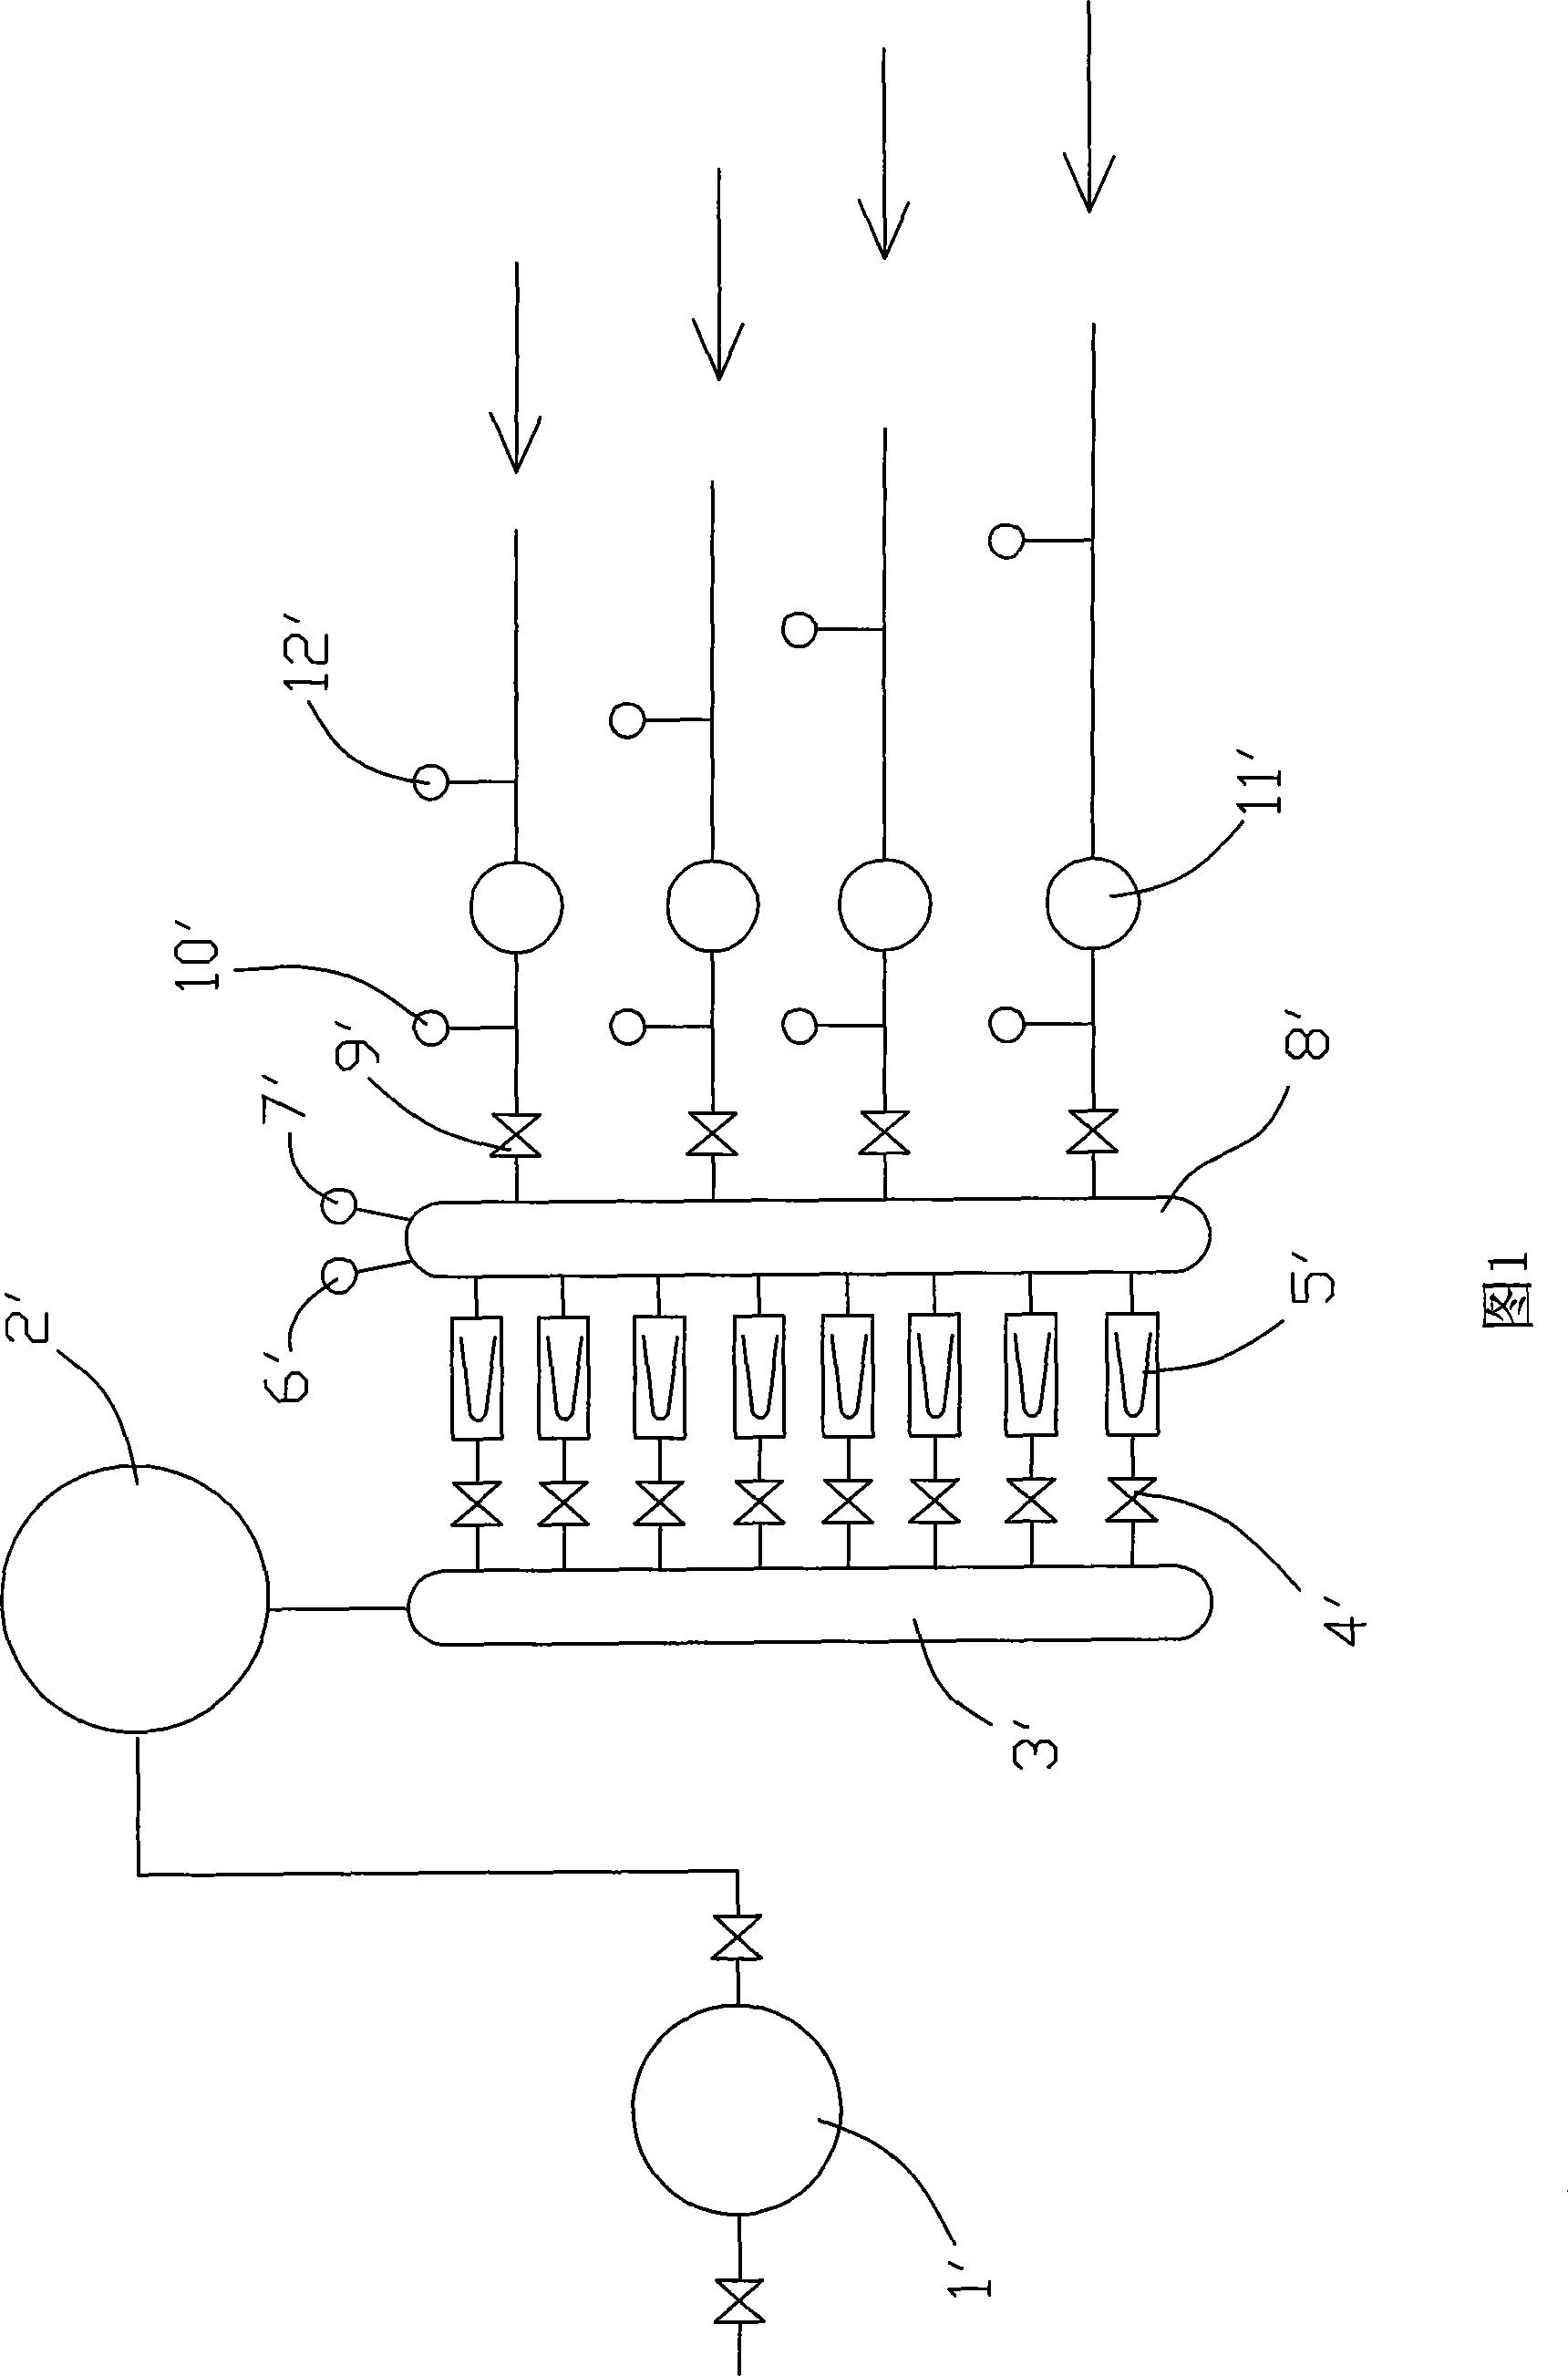 Apparatus for calibrating gas instrument